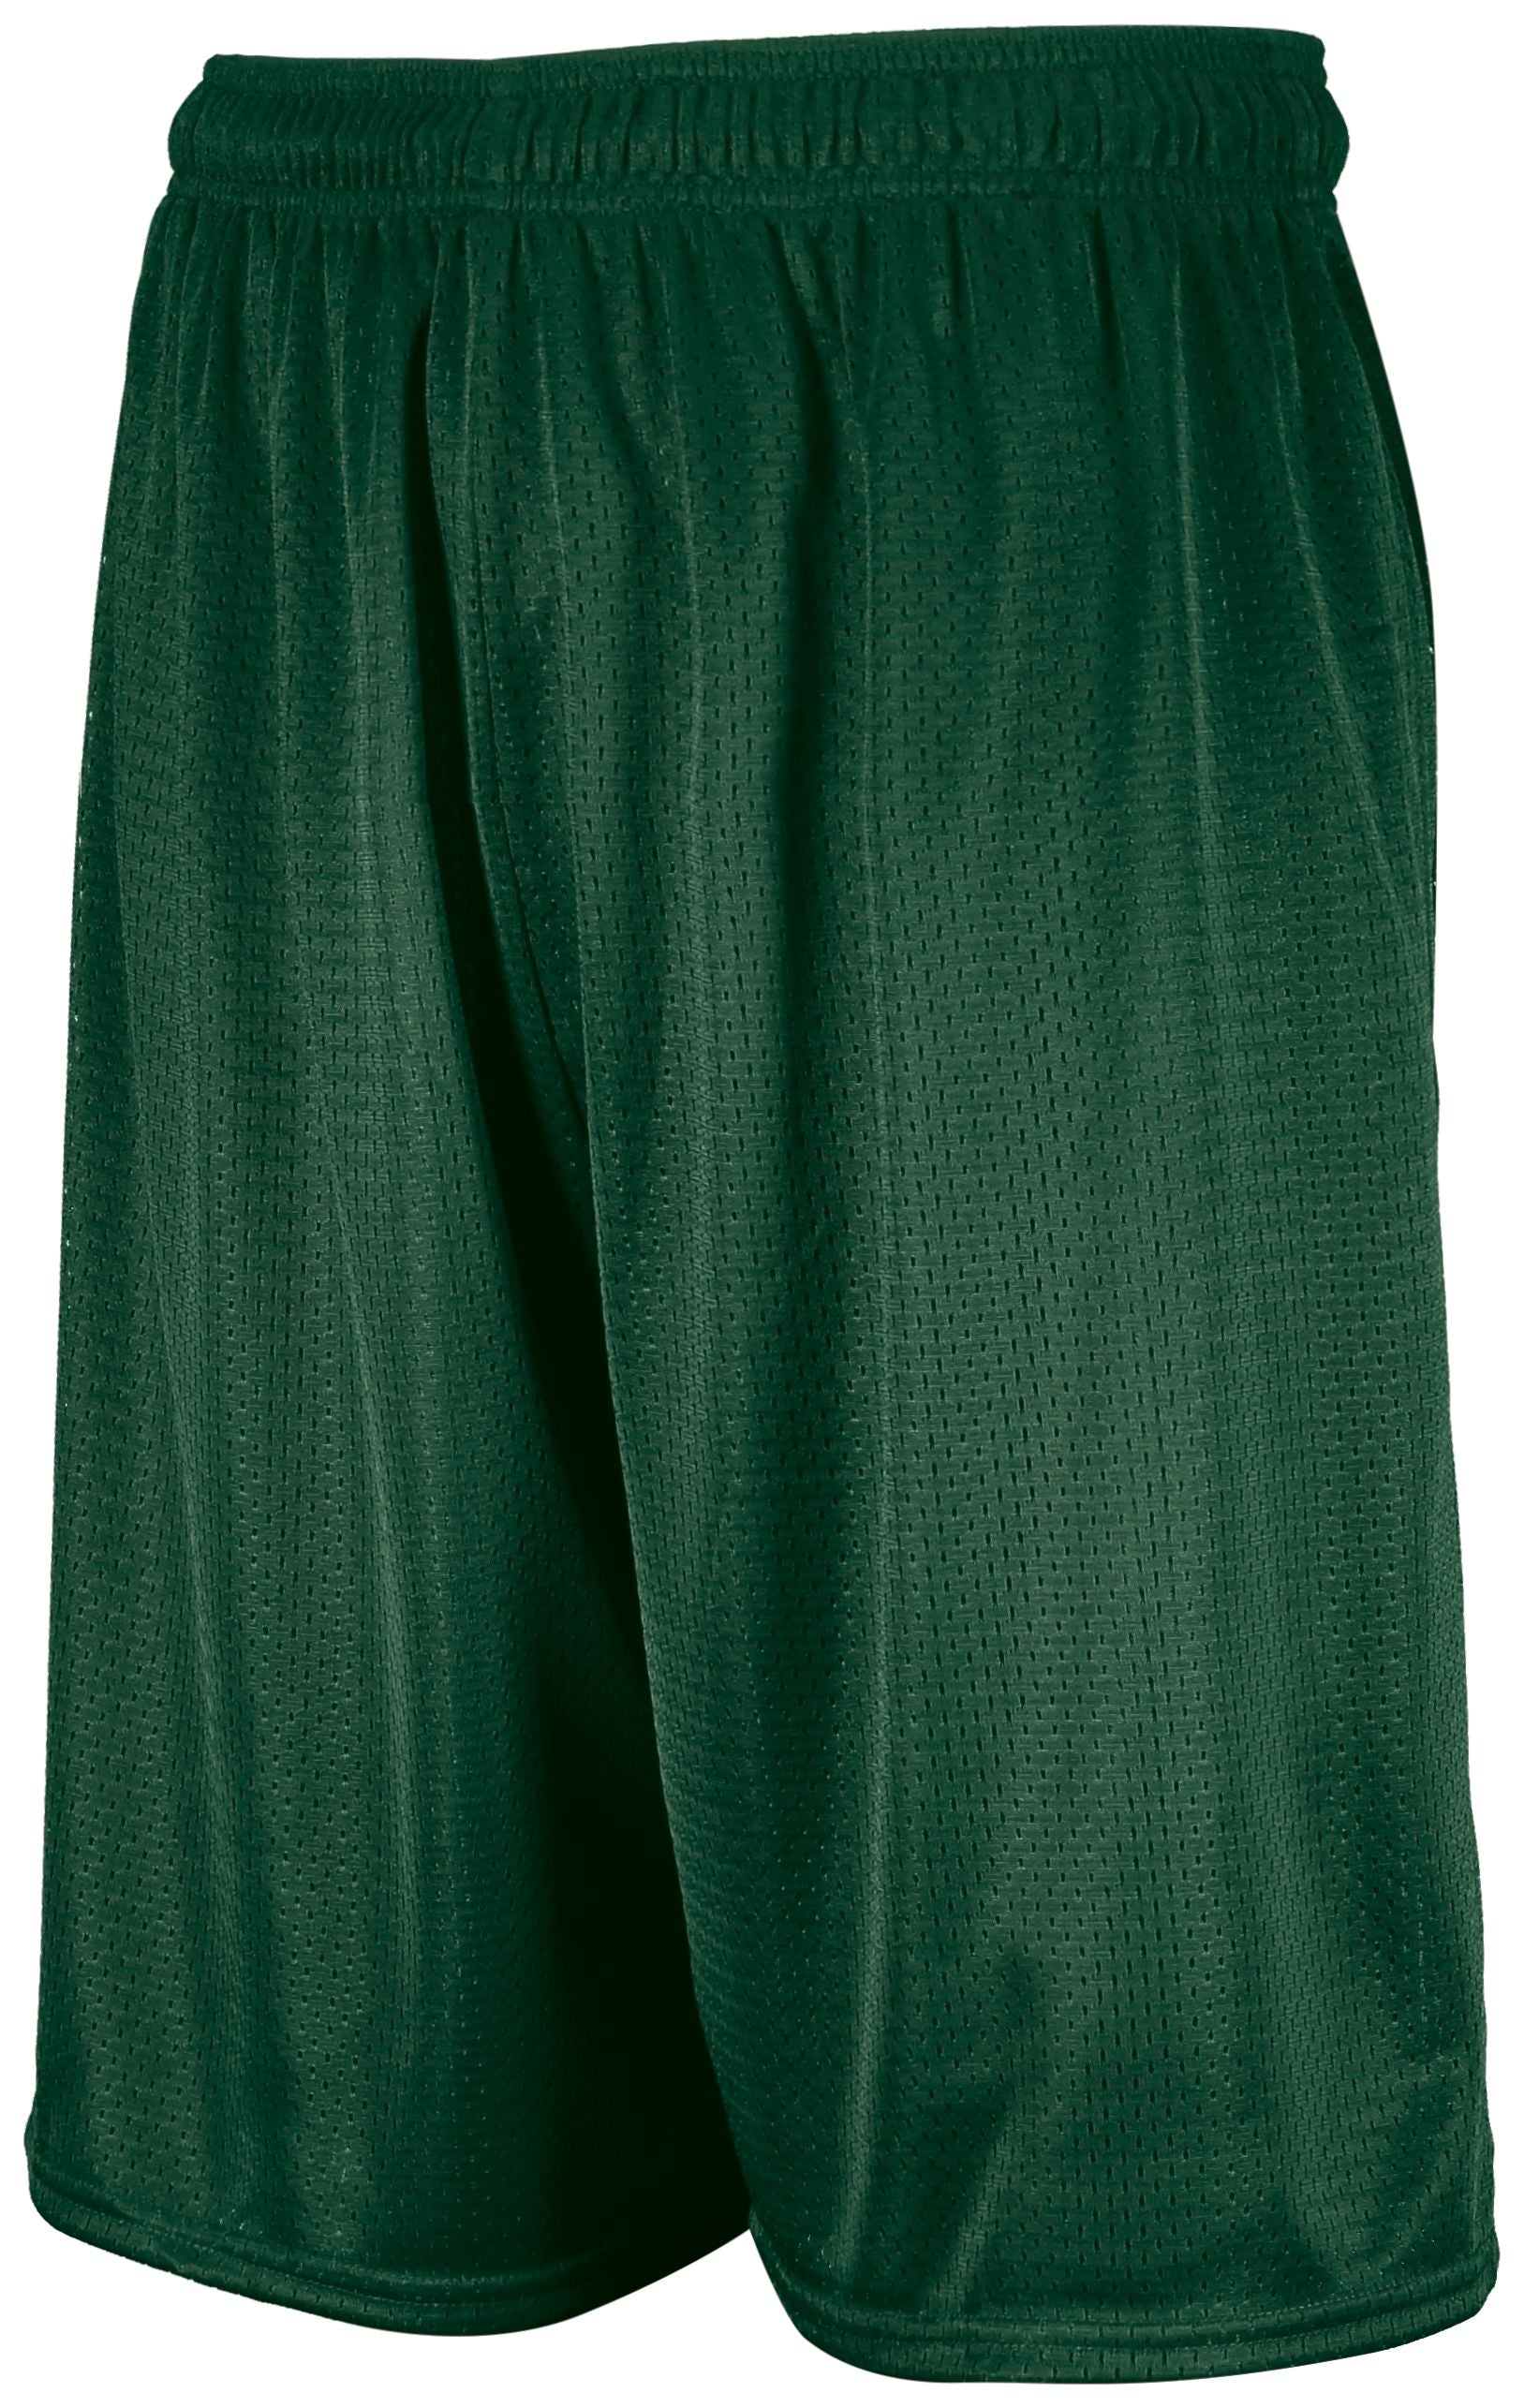 Russell Athletic Youth Dri-Power Mesh Shorts in Dark Green  -Part of the Youth, Youth-Shorts, Russell-Athletic-Products product lines at KanaleyCreations.com